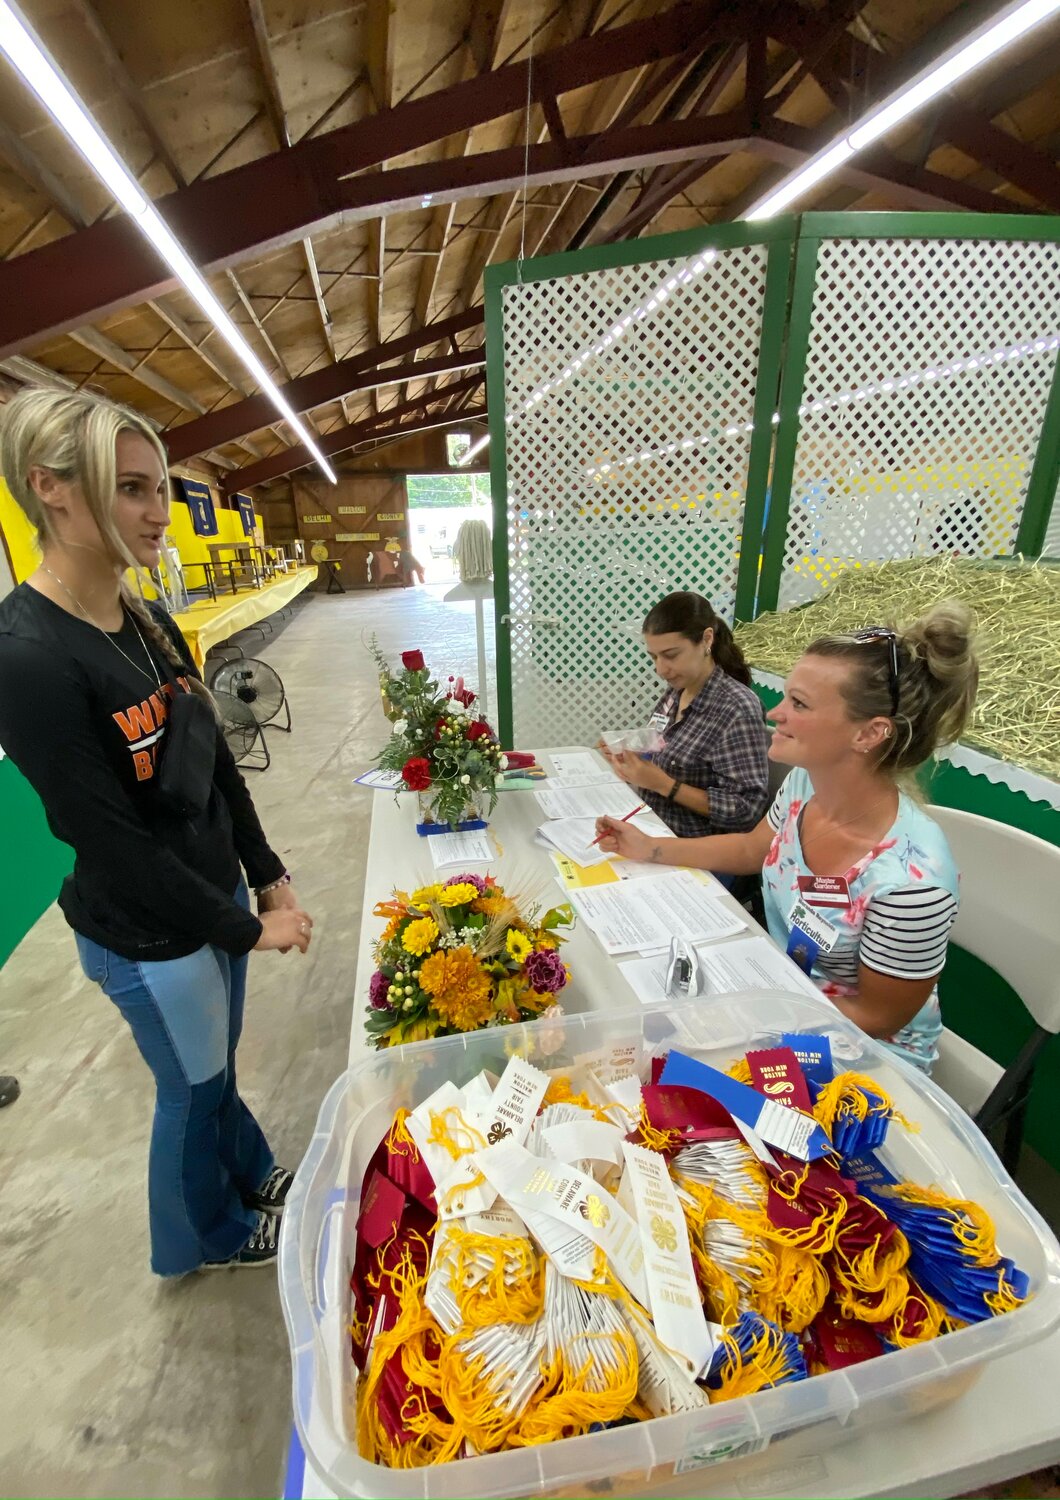 4H Judges Meranda Reynolds and Spencer Merolla quiz Addalyn Strub about her floral design exhibit, Sunday, Aug. 13 at the 136th annual Delaware County Fair.